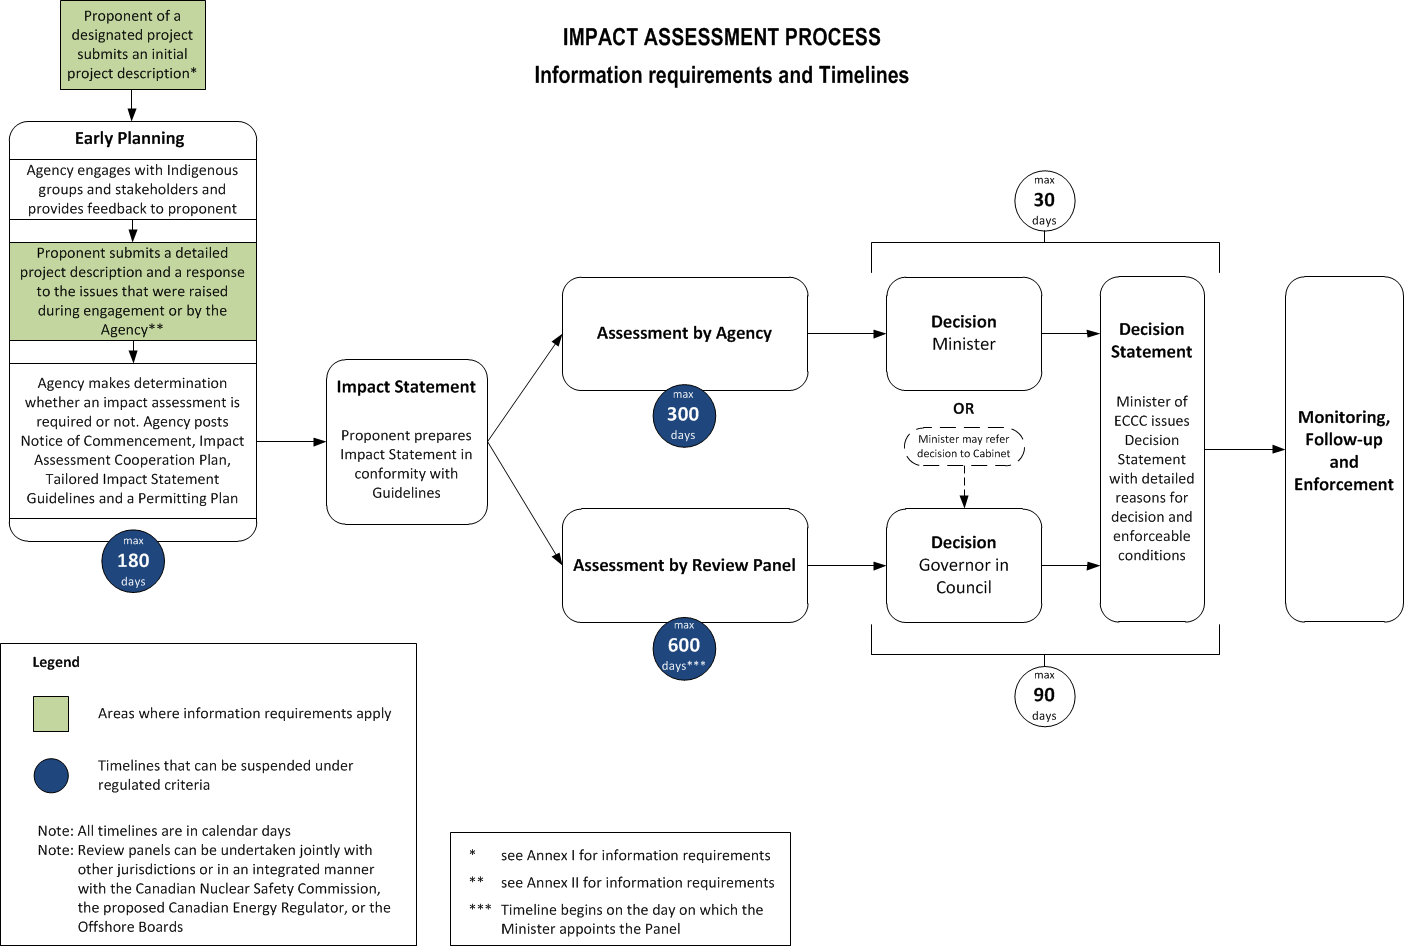 Impact assessment process: Information requirements and Timelines